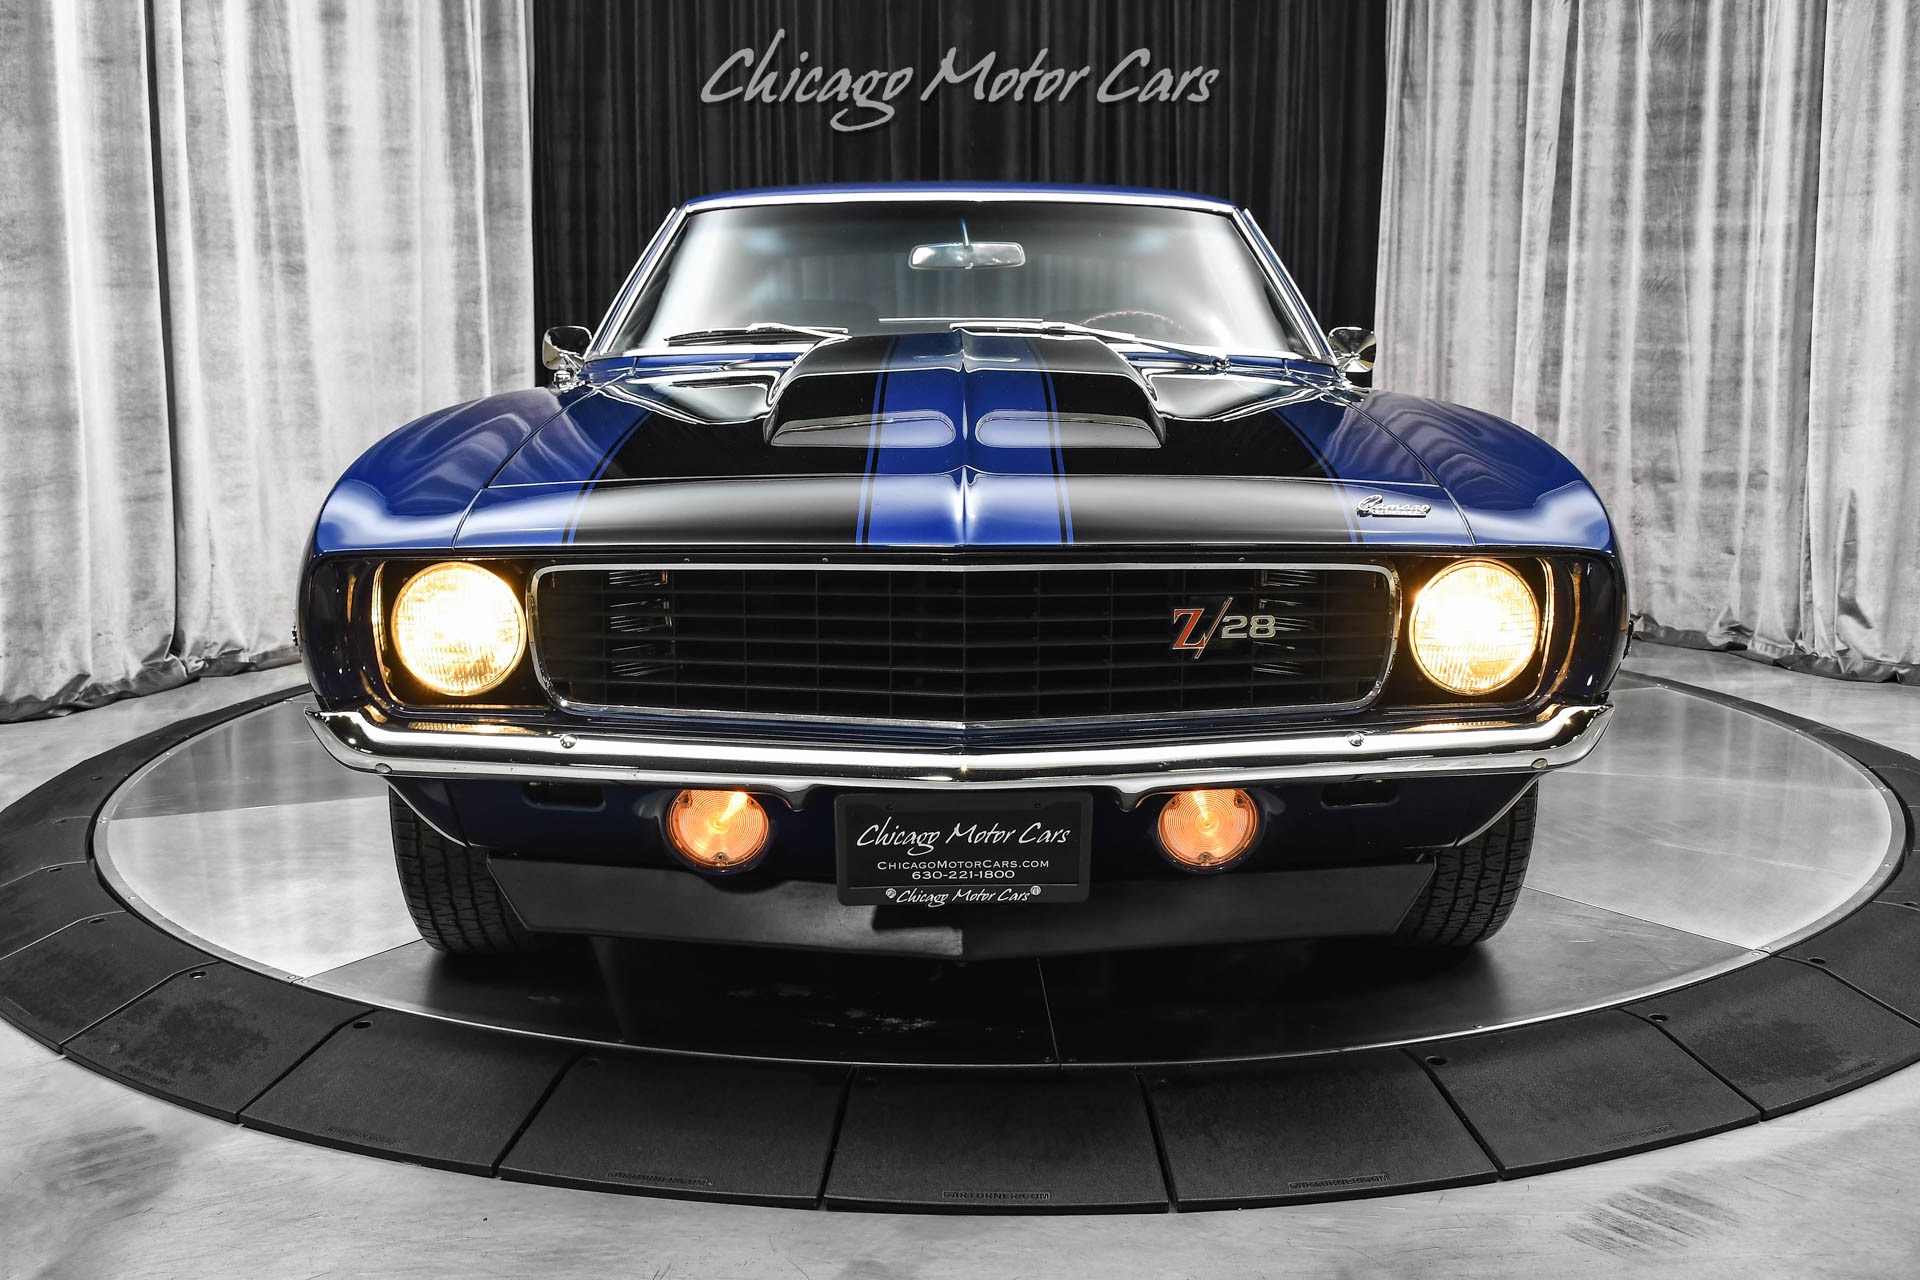 Used-1969-Chevrolet-Camaro-Z28-RS-Coupe-Frame-Off-Restoration-4-Speed-Manual-Stunning